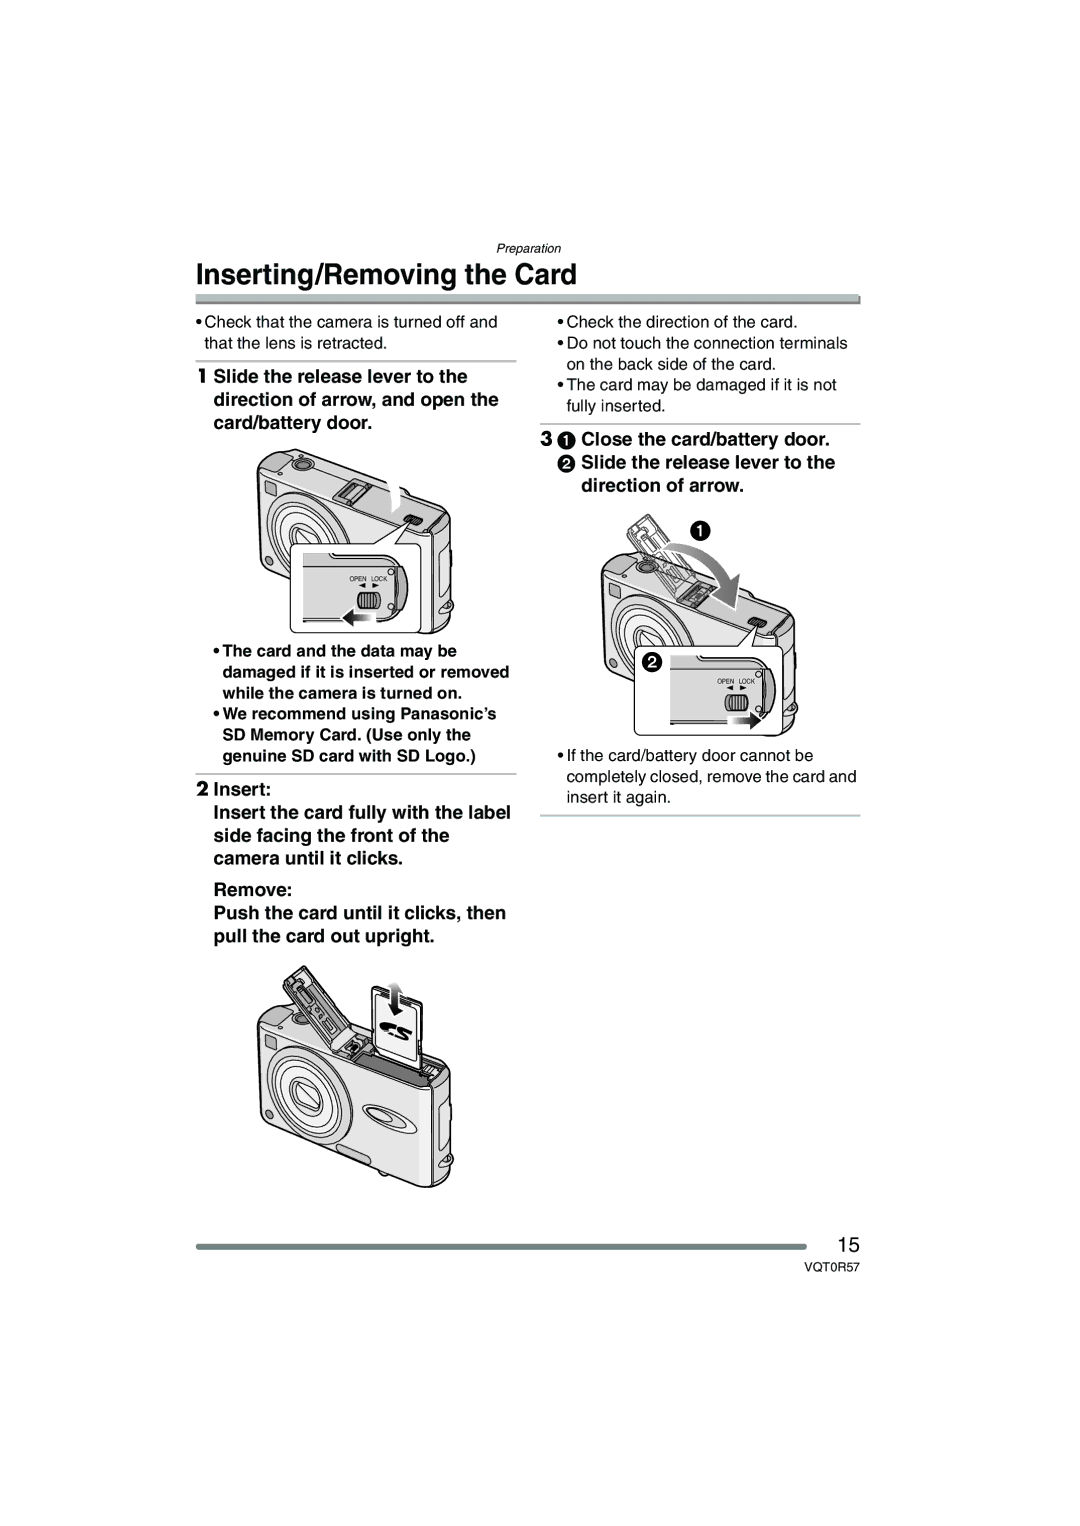 Panasonic DMC-FX8GN operating instructions Inserting/Removing the Card 